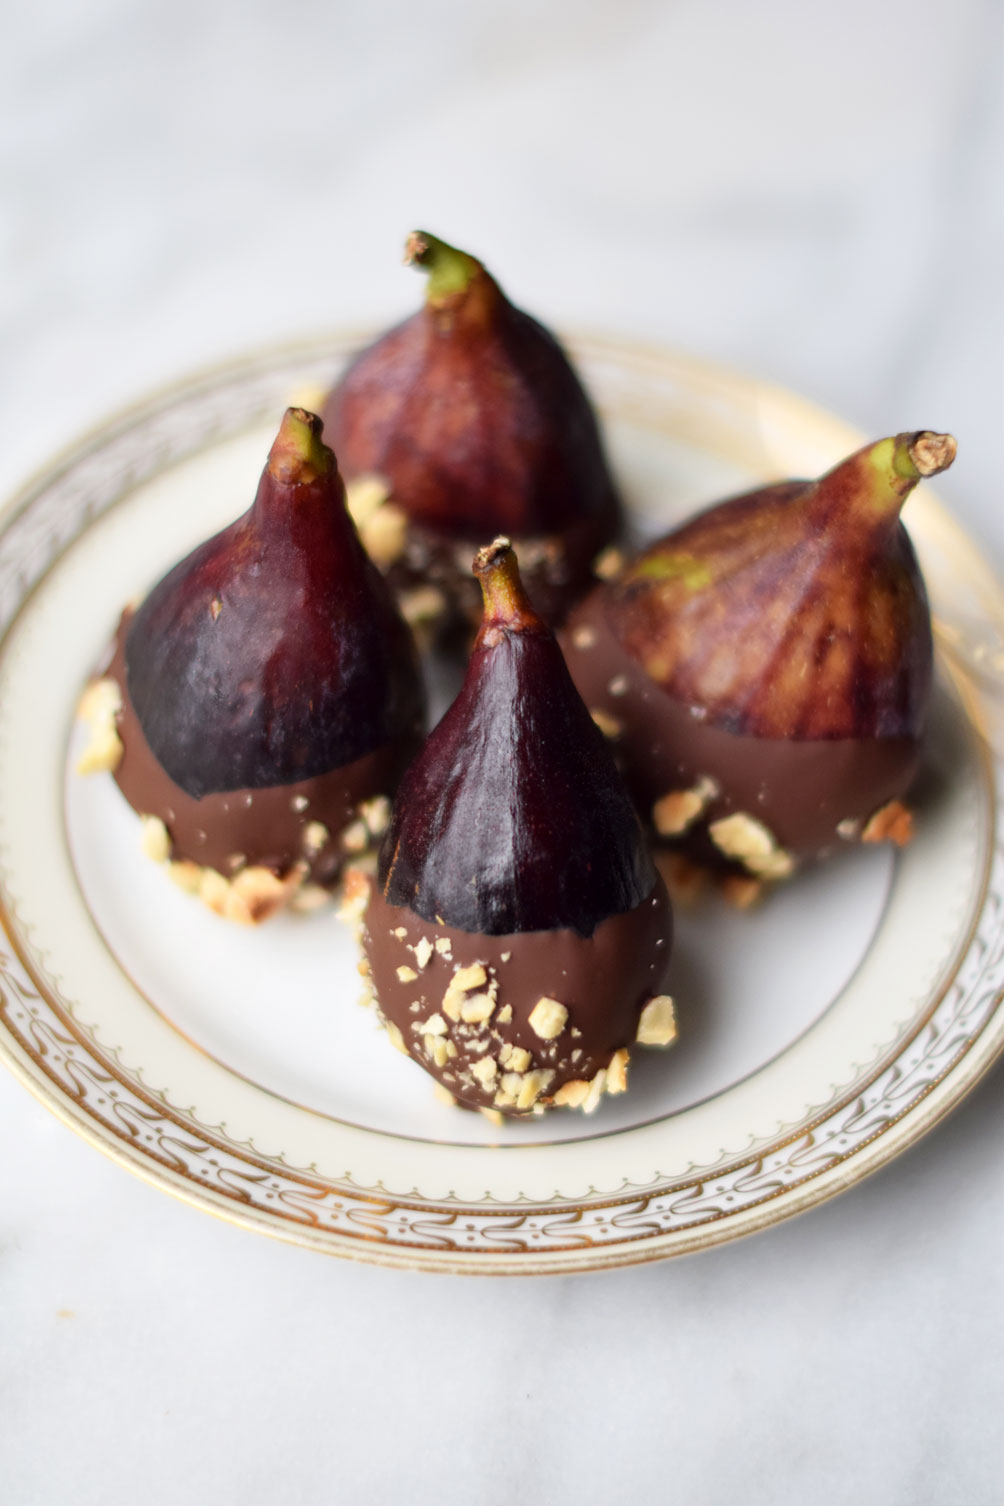 easy and decadent summer recipe for dark chocolate figs mariner with hazelnut crumble